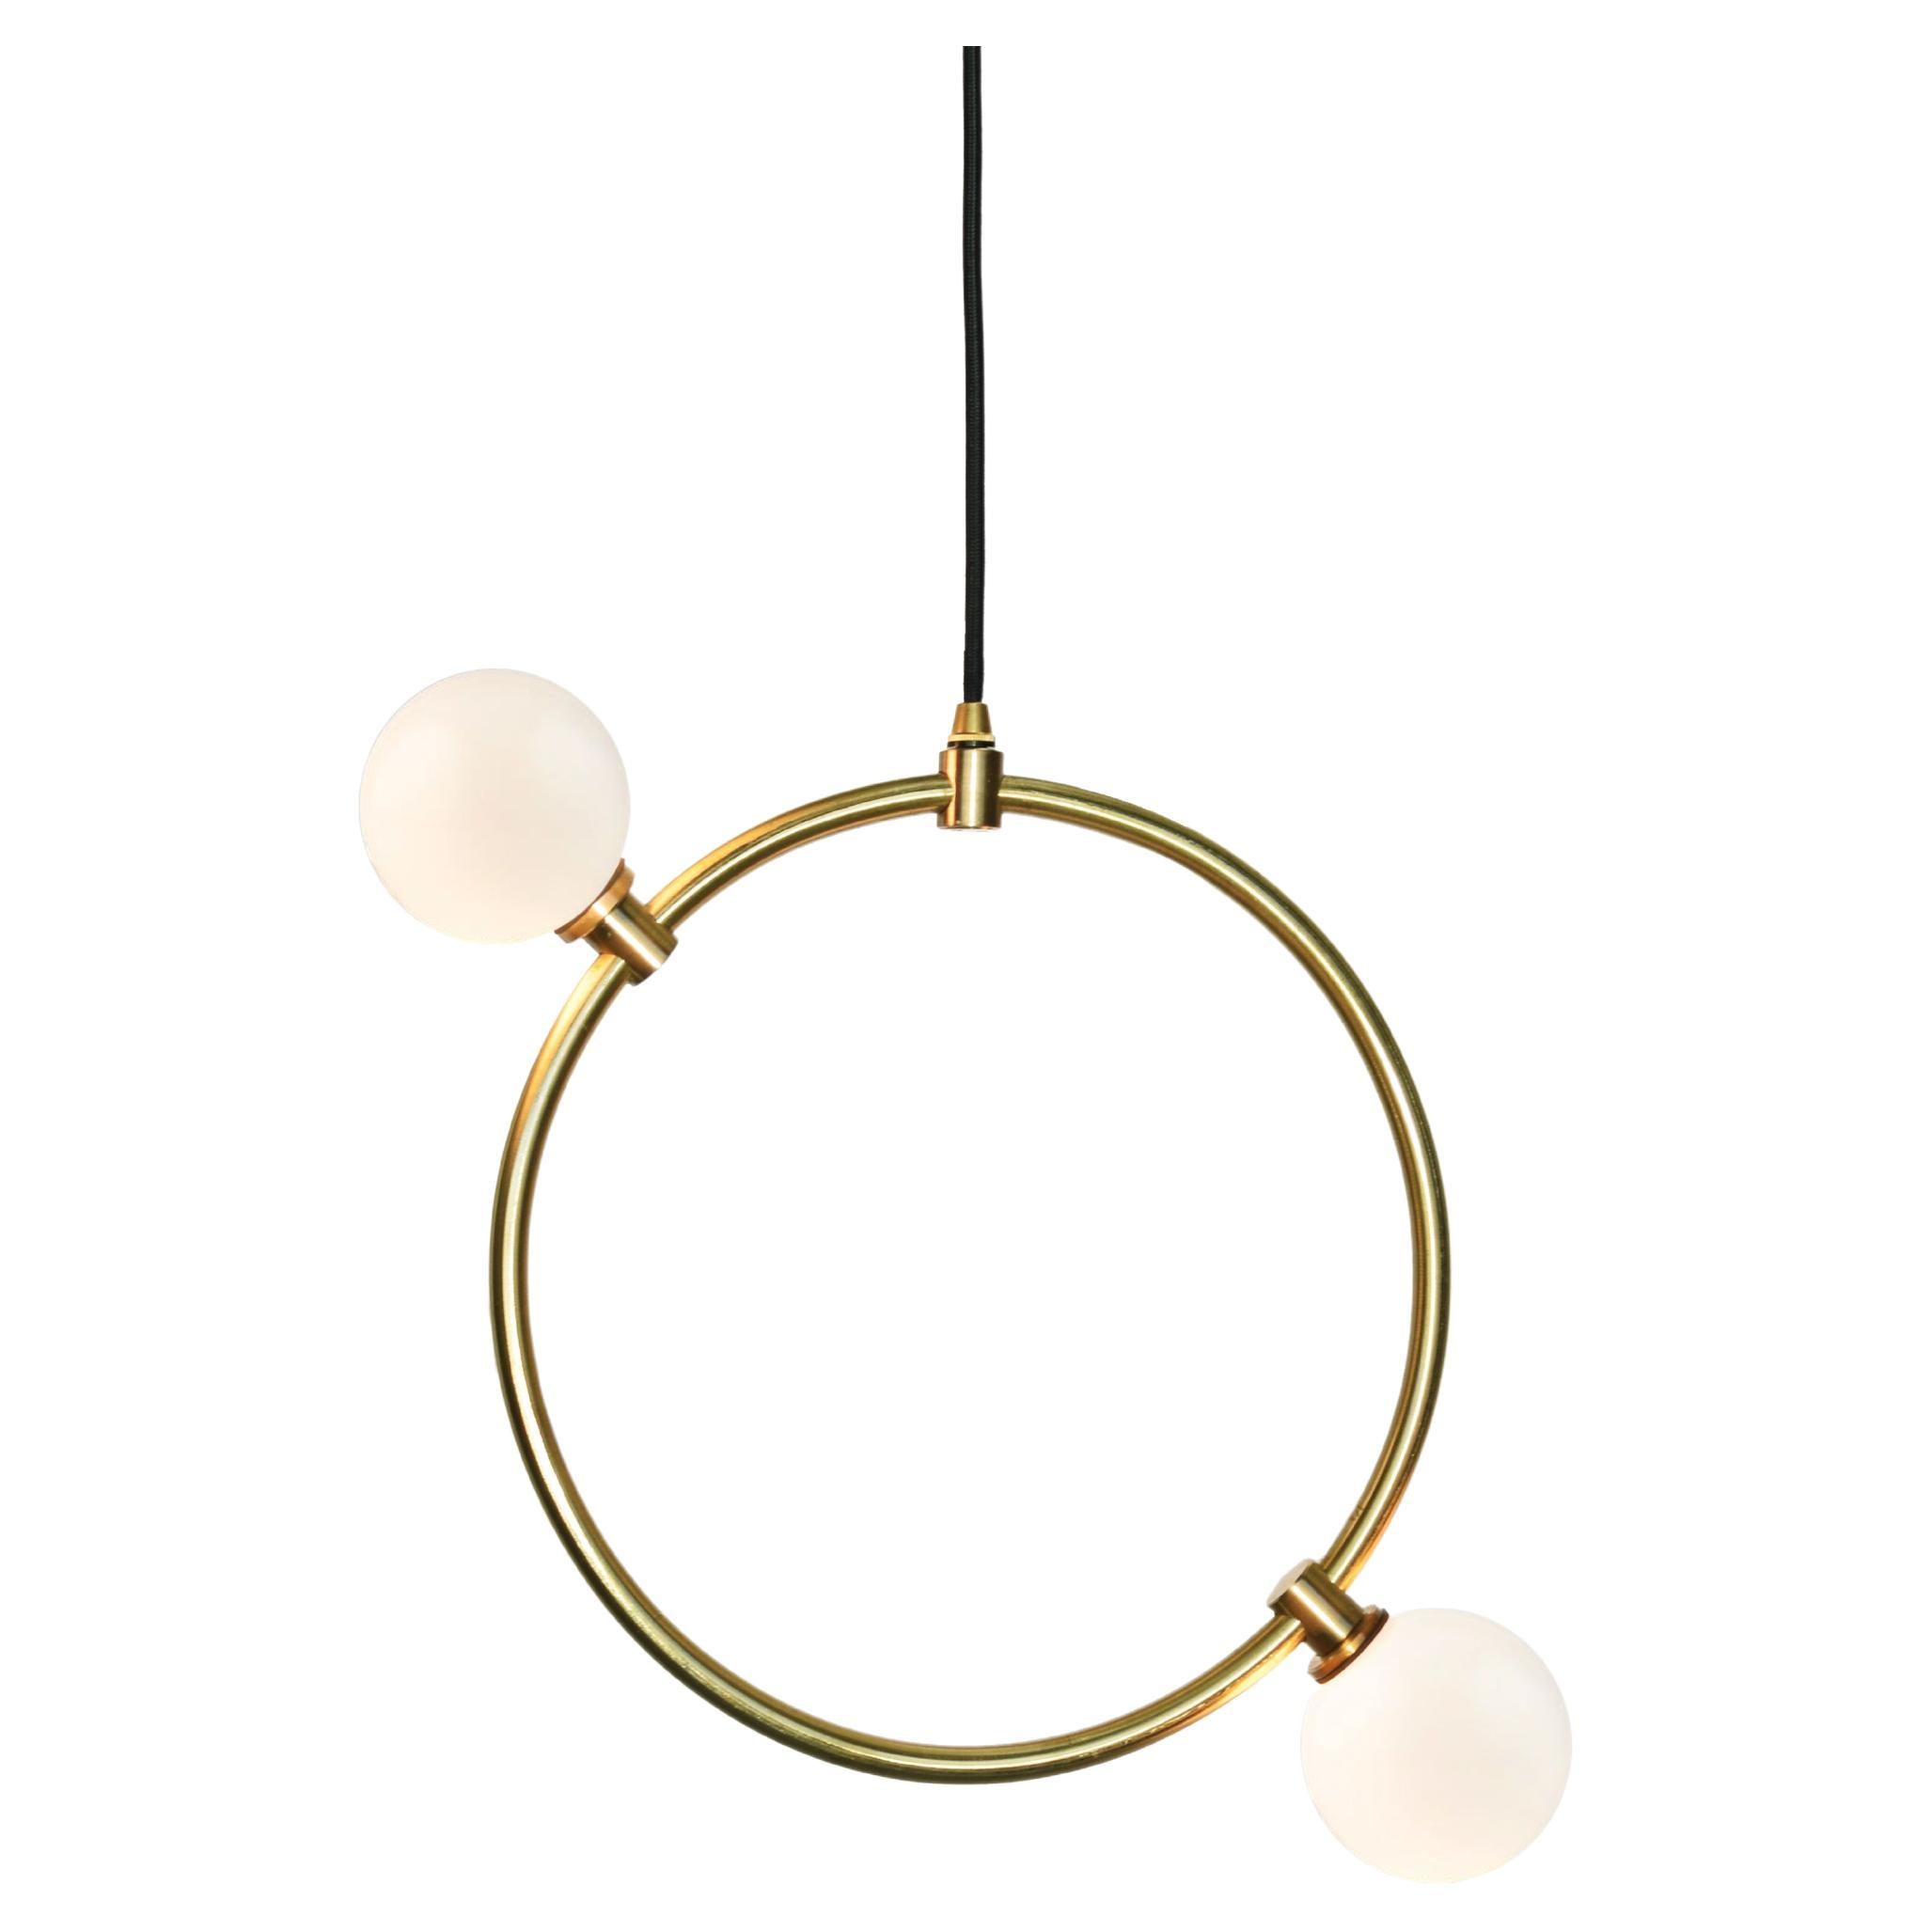 'Drops Pendant Small' by Marc Wood. Handmade Brass Ring Lamps, Opal Glass Shades For Sale